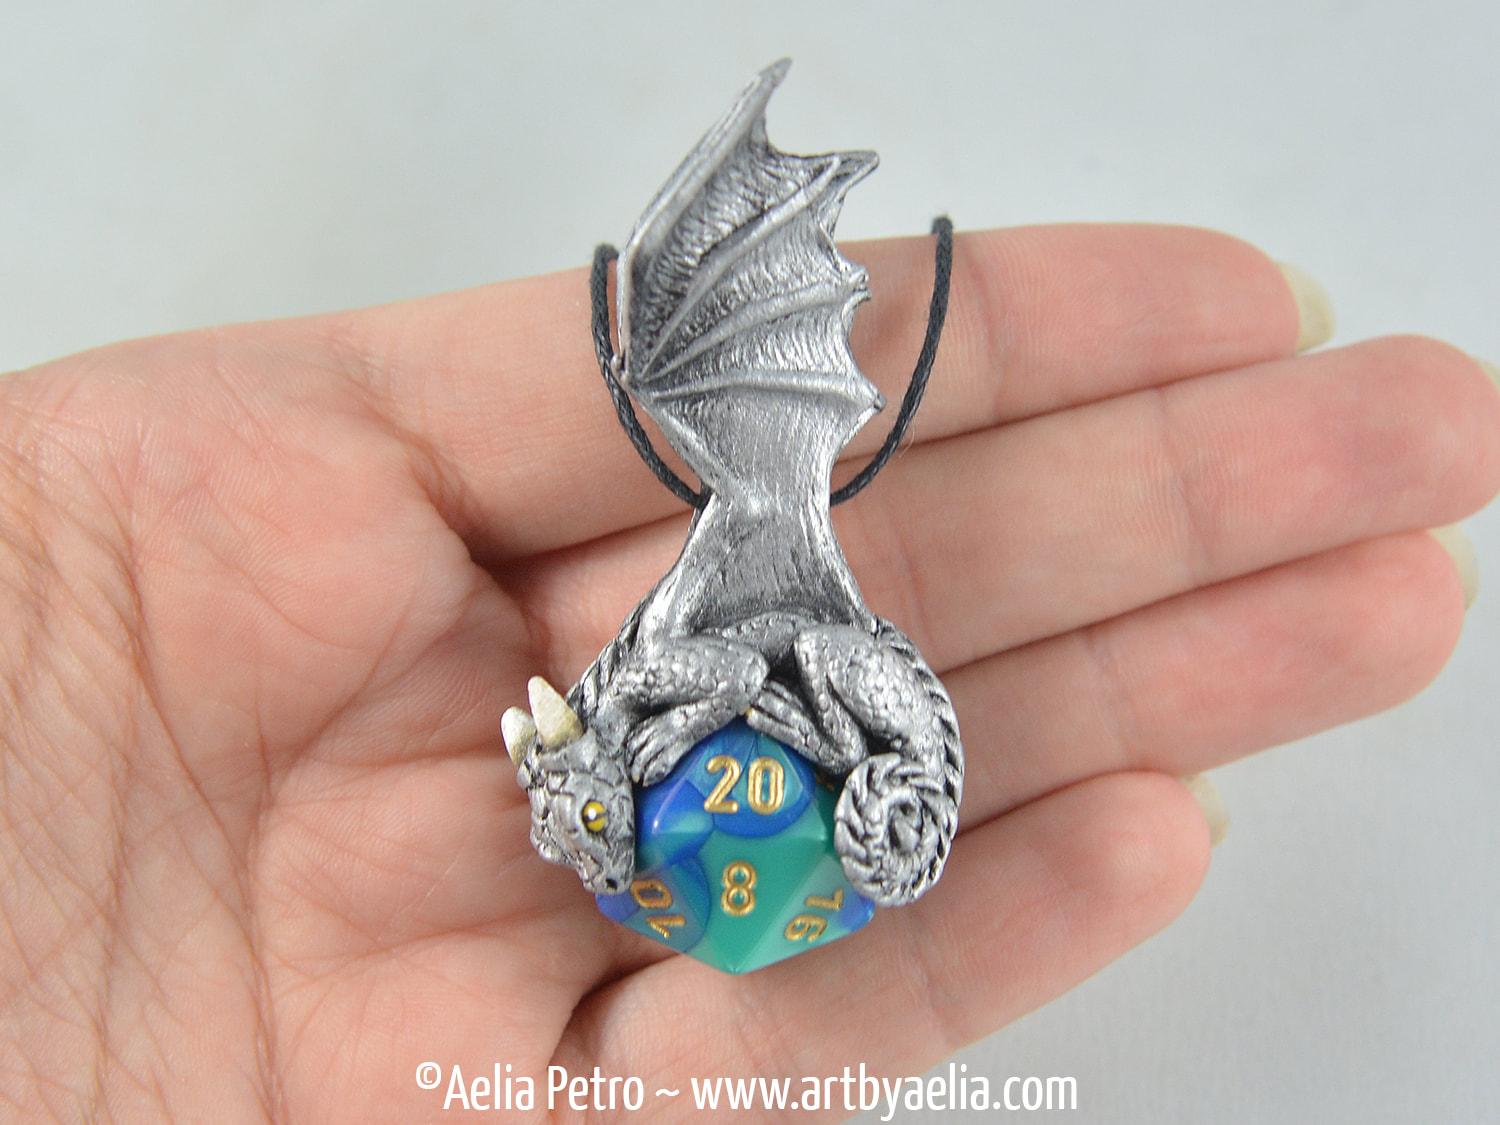 D20 captured necklace with dragon head clasp – DragonClaw ChainMaille